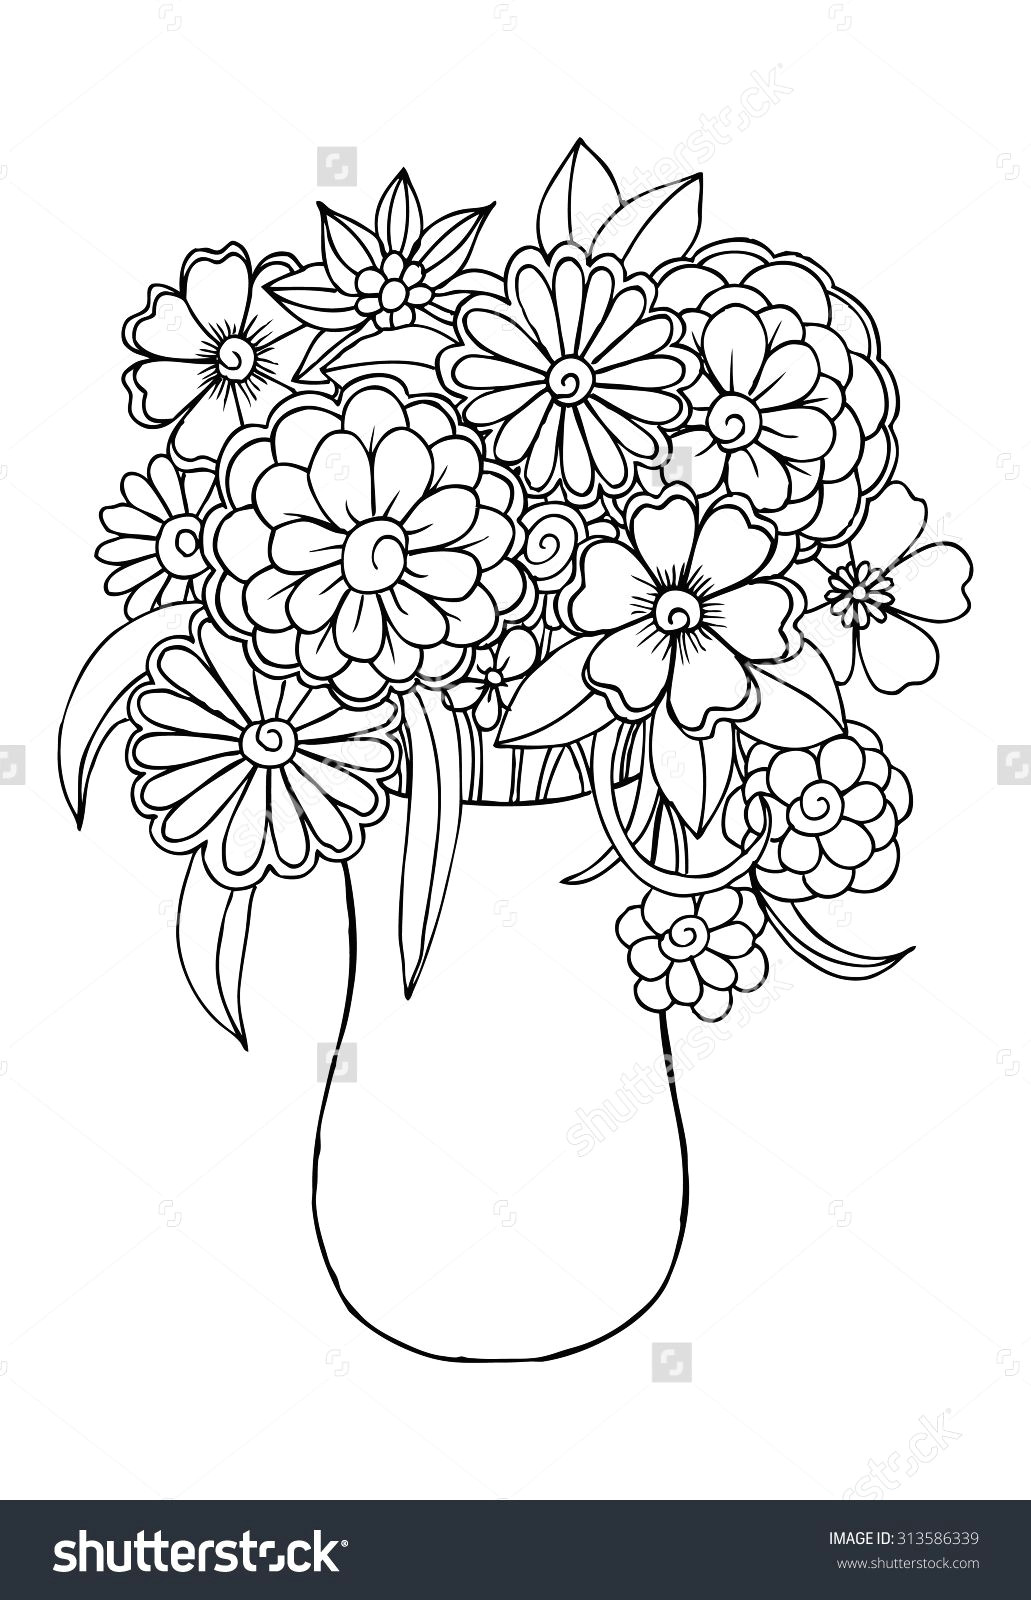 Drawing Of A Rose Bouquet Vector Bouquet Of Flowers In A Vase Art Draw Flowers and Plants